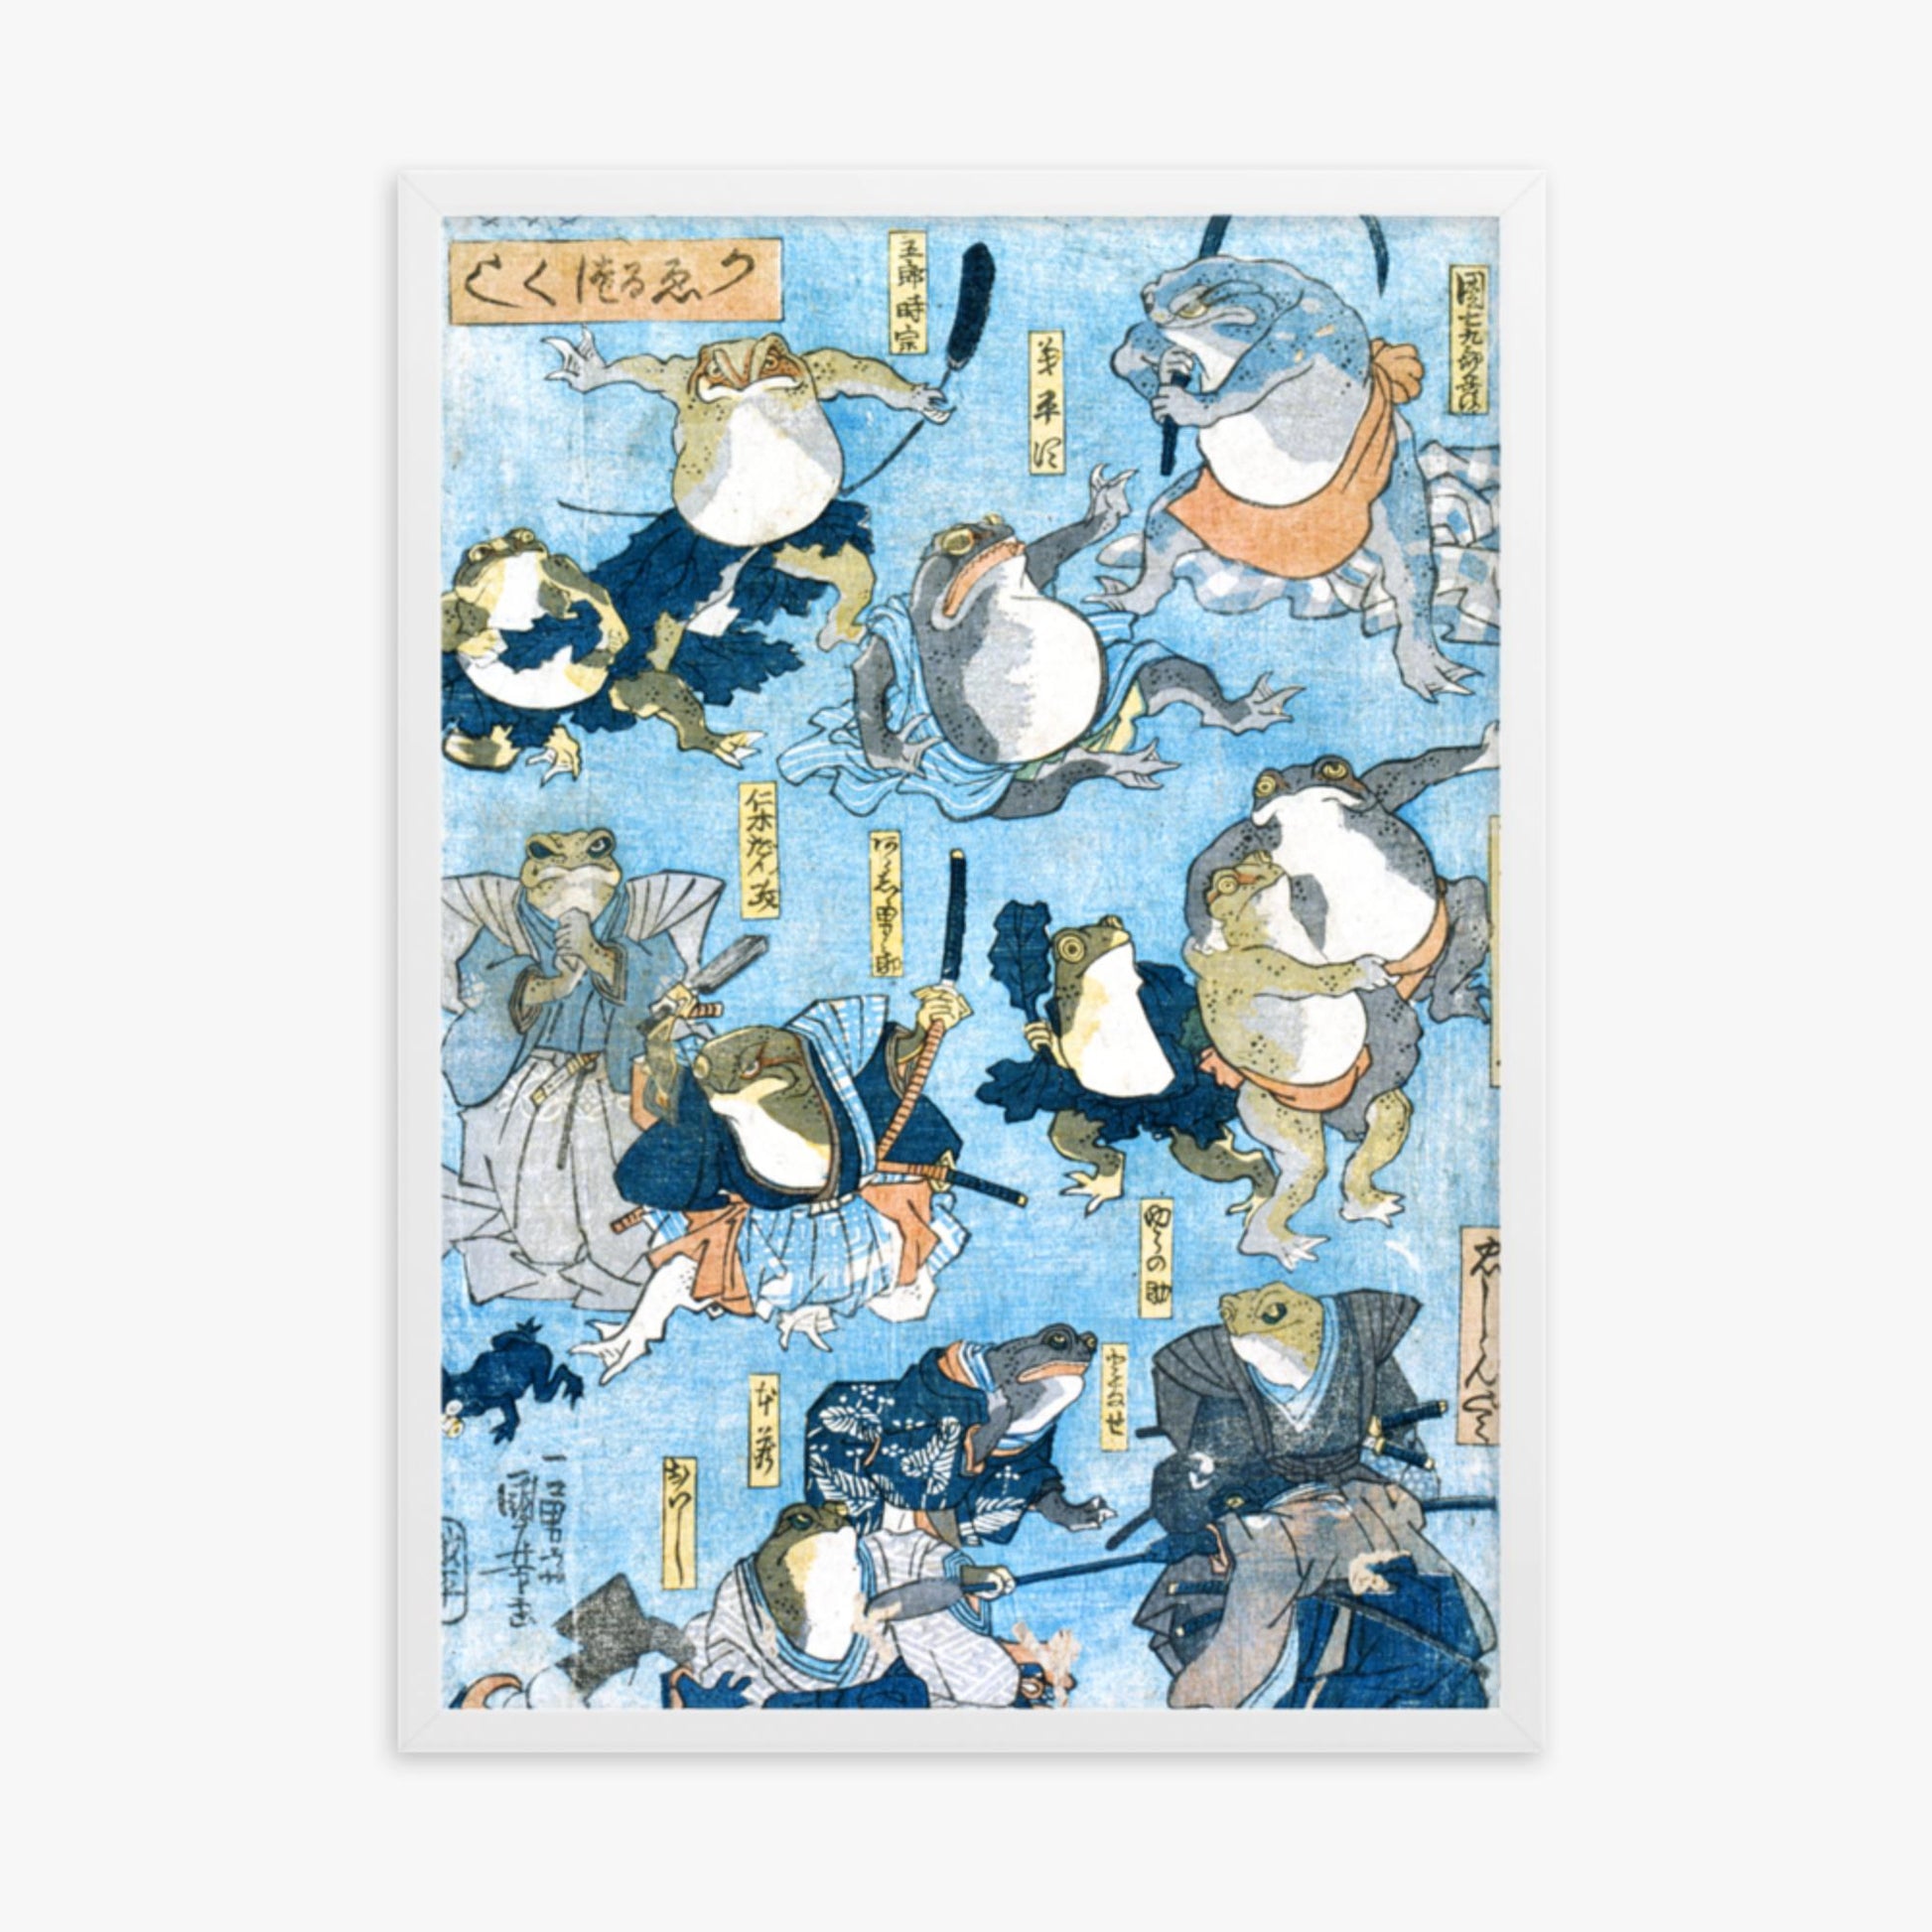 Utagawa Kuniyoshi - Famous Heroes of the Kabuki Stage Played by Frogs  50x70 cm Poster With White Frame